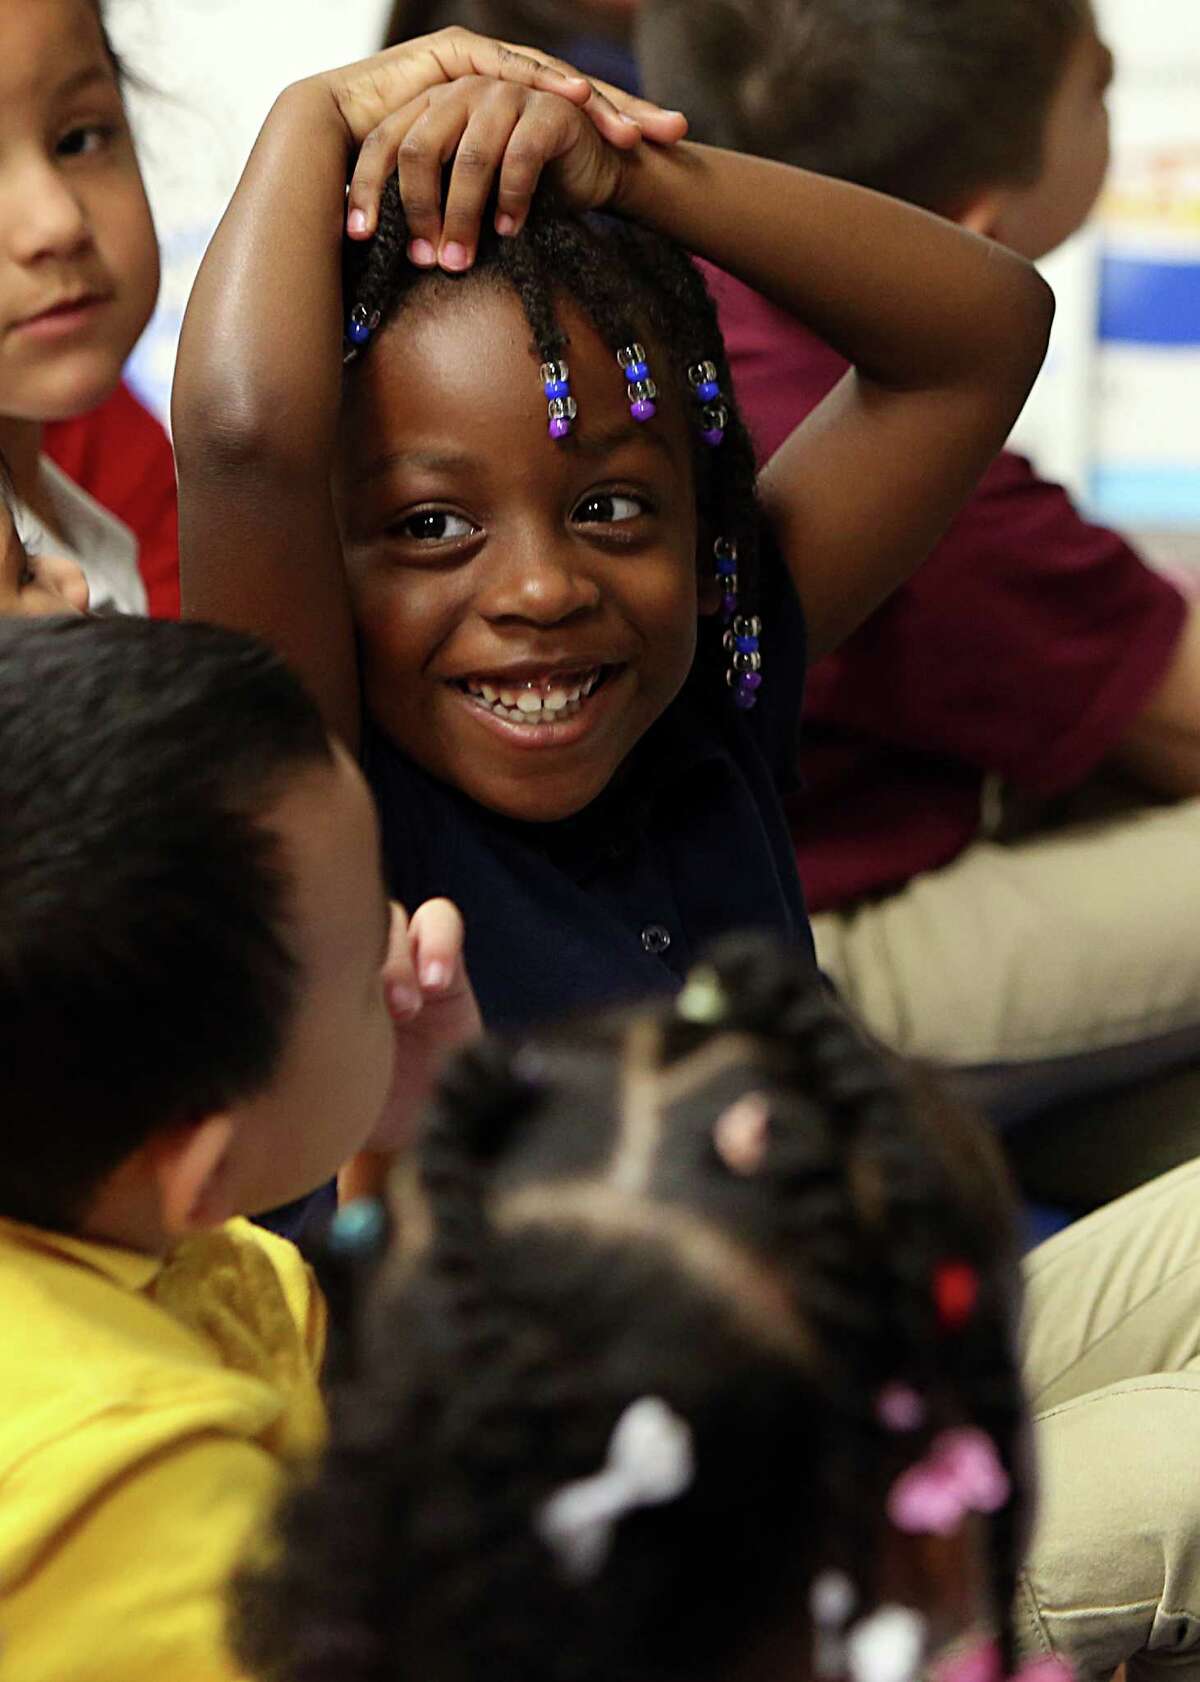 Trinidy Taylor, 4, smiles at teacher Lisa Joe during a morning pre-kindergarten lesson at Liestman Elementary School on Wednesday, Sept. 24, 2014, in Houston. A coalition of educators, business and civic leaders called Early Matters is pushing to expand high-quality, full-day pre-kindergarten for 4 year-olds in the greater Houston area. Alief ISD only offers half-day pre-kindergarten.